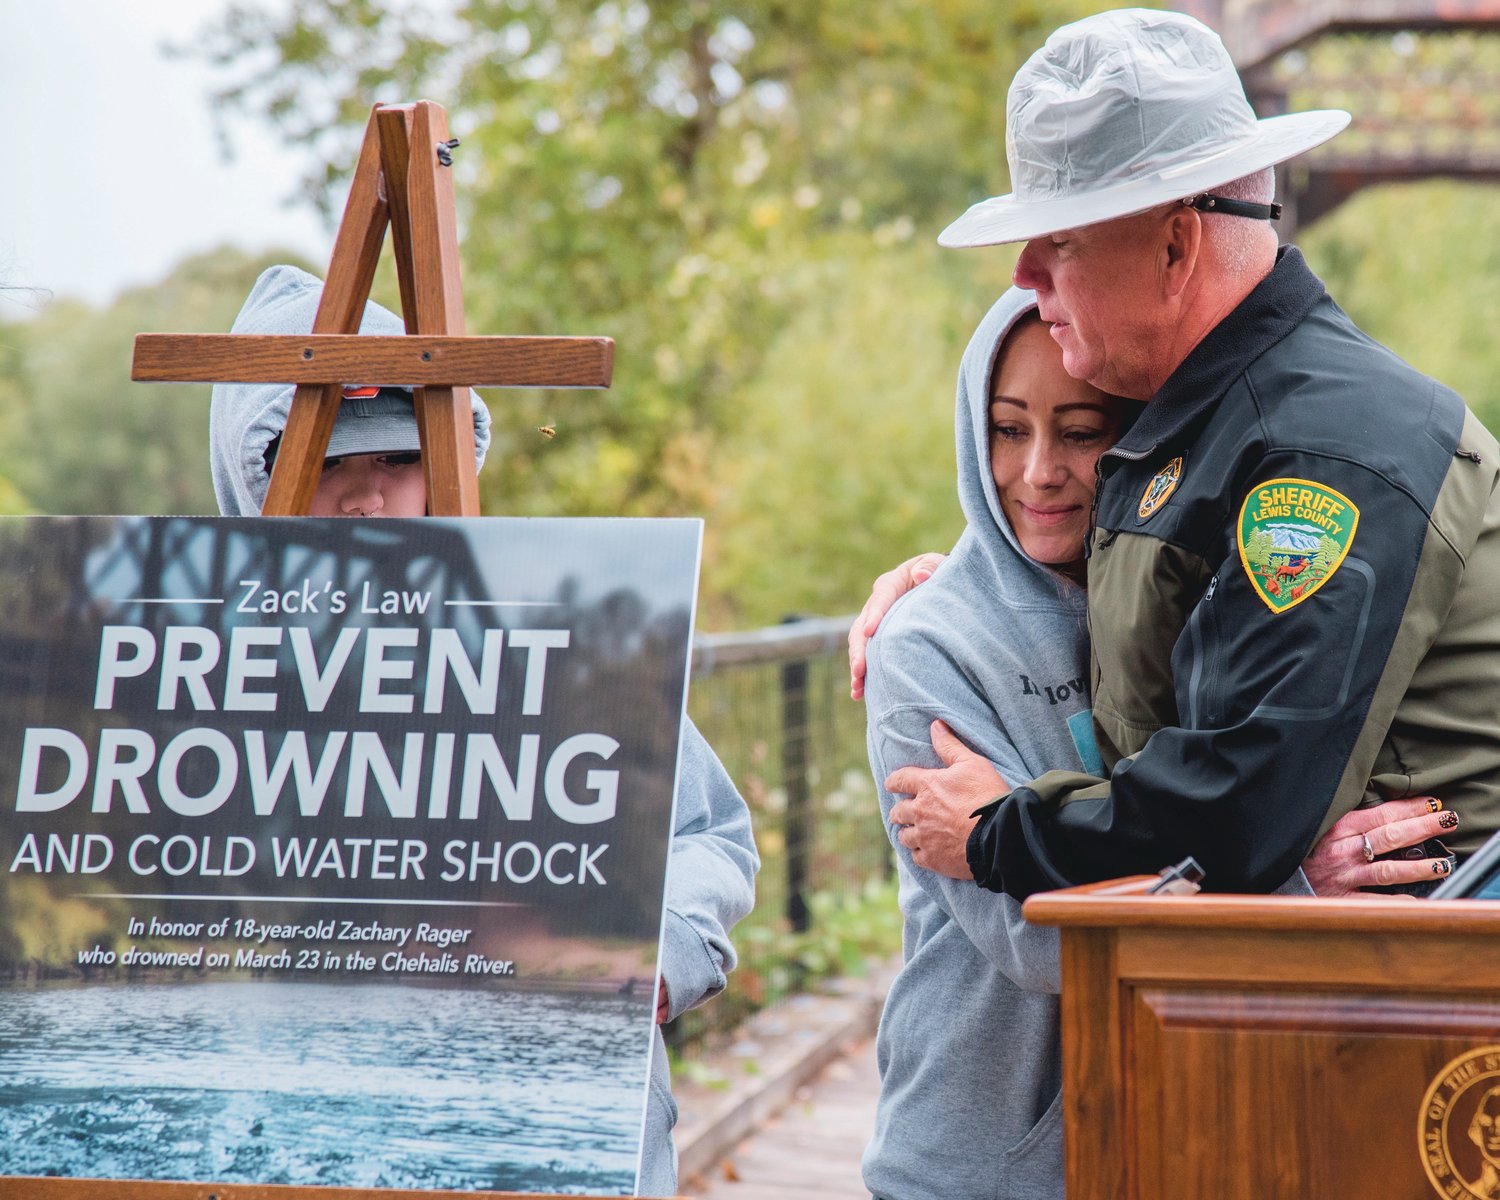 Sheriff Rob Snaza embraces Kim Rager during an event raising awareness around cold water shock and honoring the life of her son Zachary Rager who drowned March 23 in the Chehalis River.